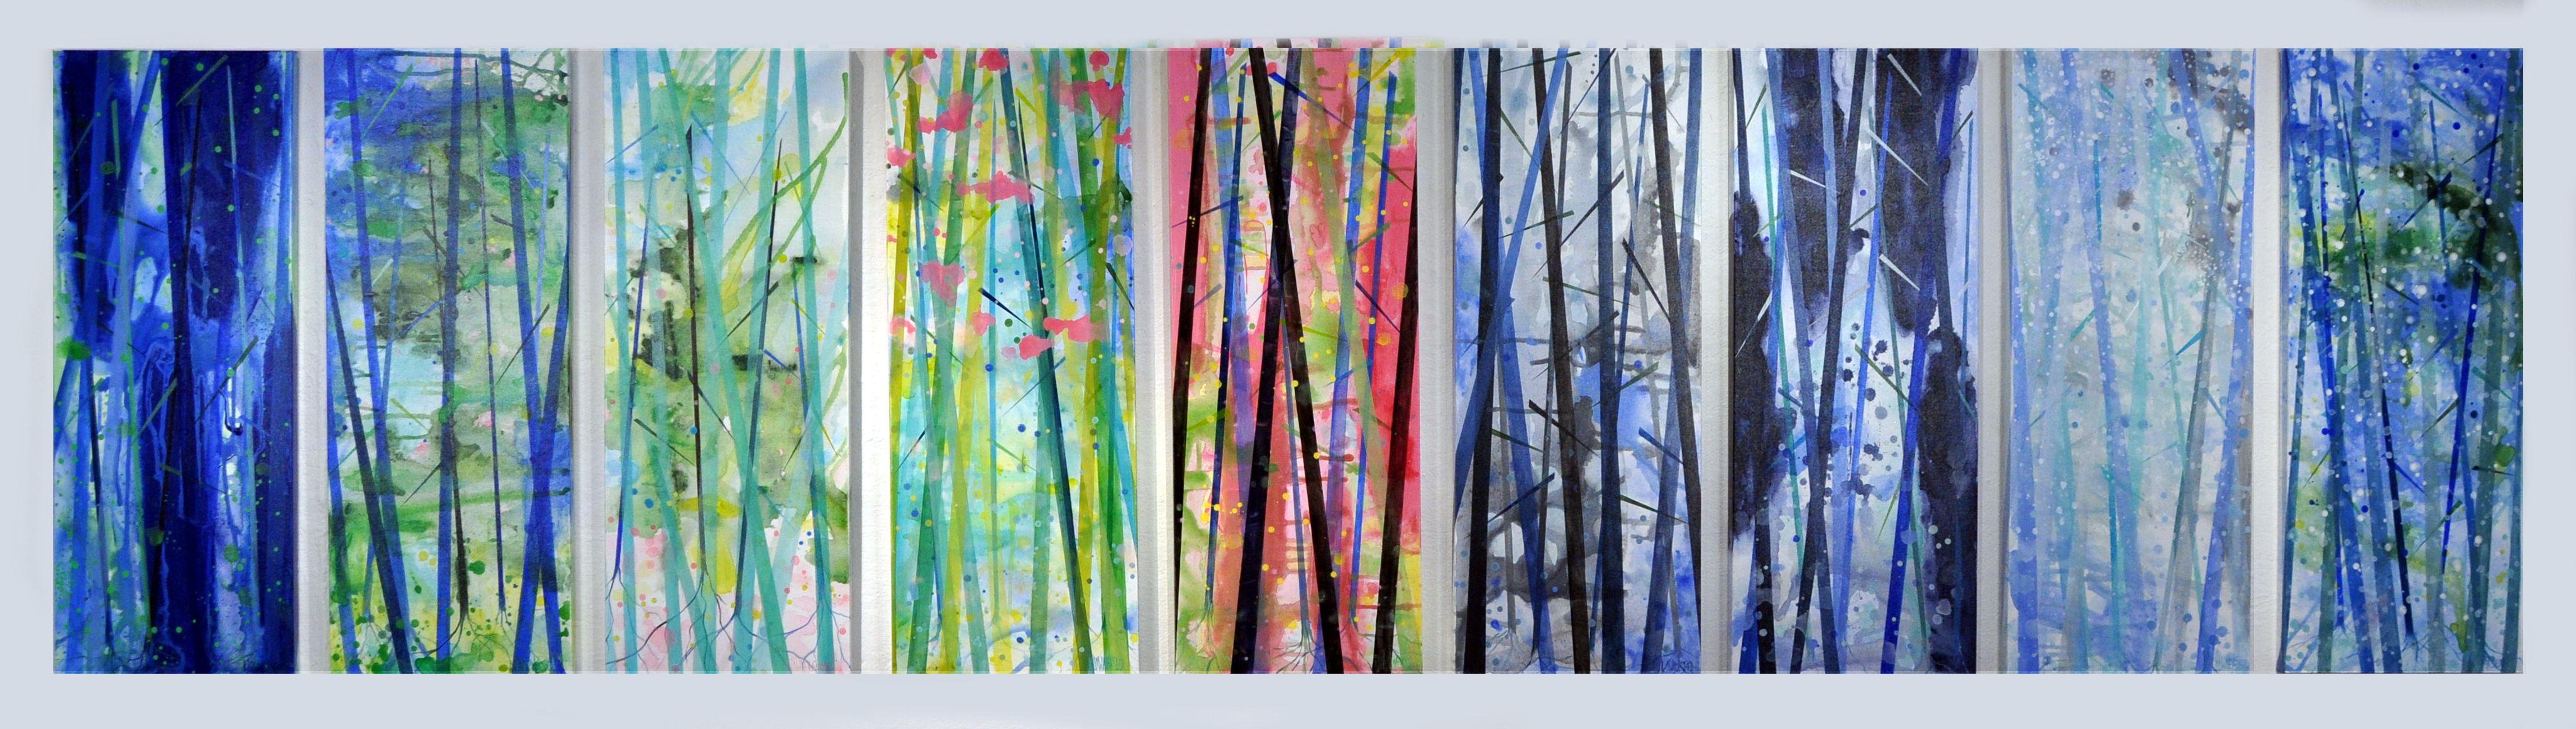 Karin Lowney-Seed Abstract Painting - The Forest, Painting, Acrylic on Canvas